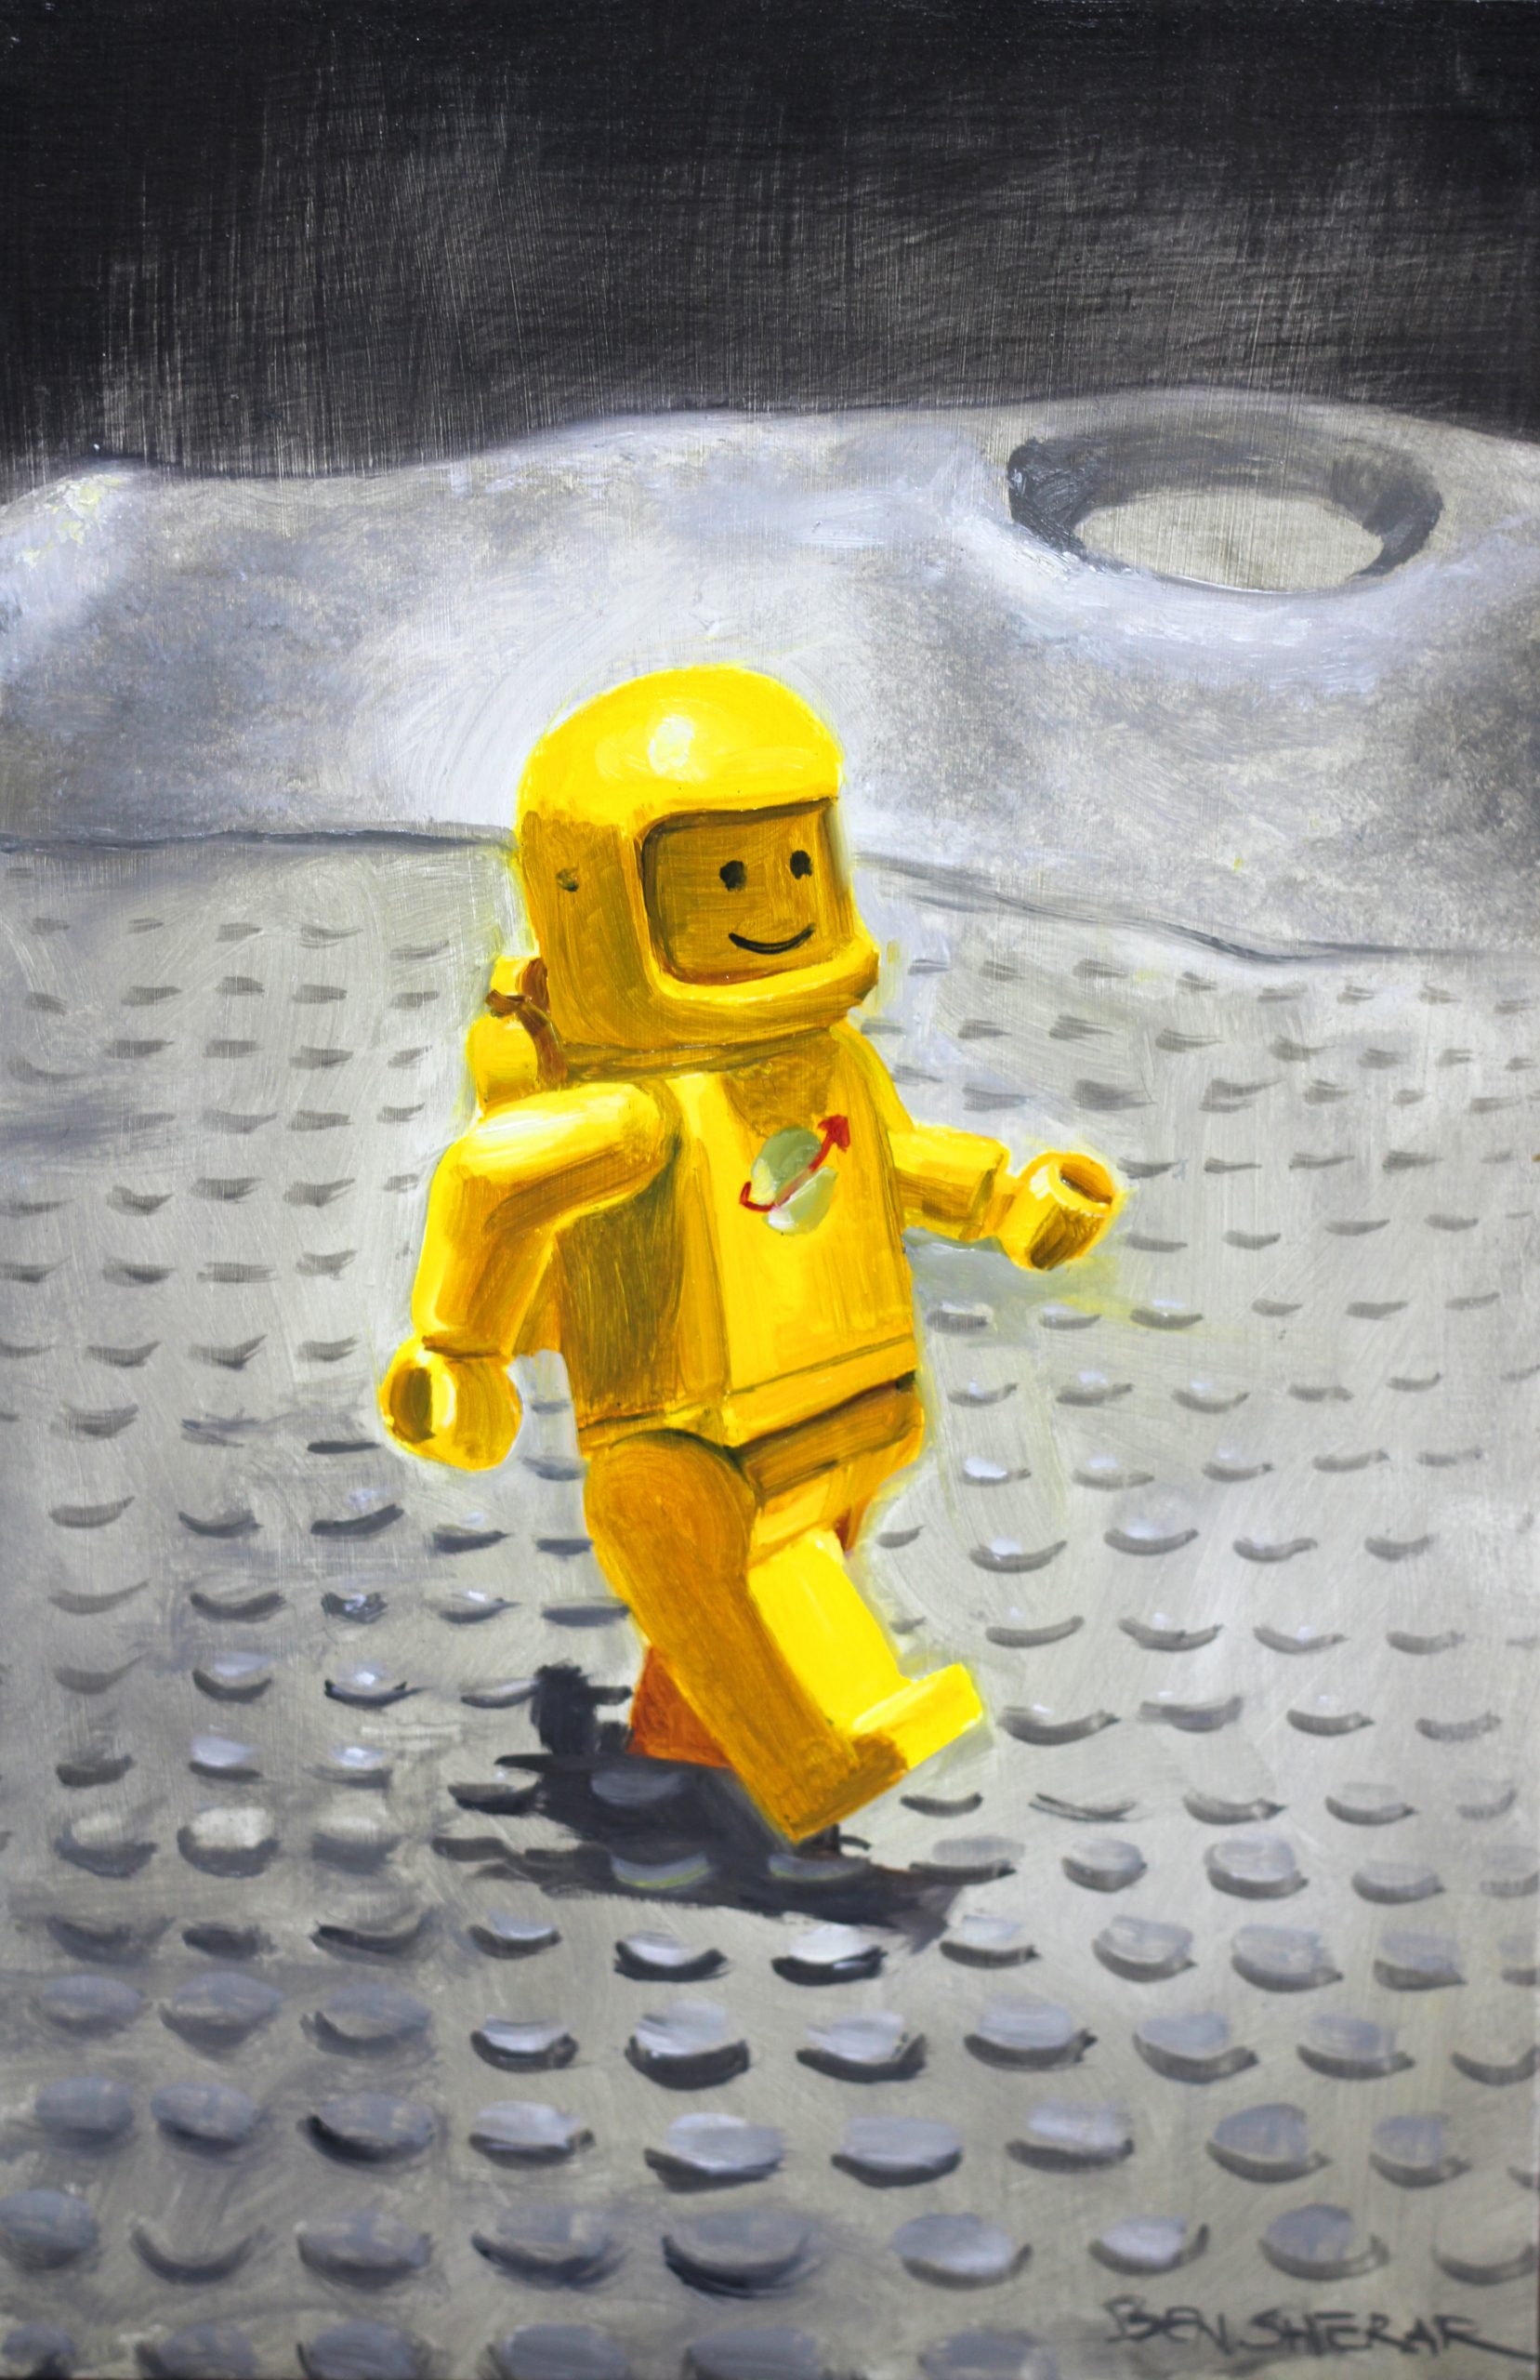 Original Oil Painting of a vintage Yellow Spaceman Toy by ben Sherar